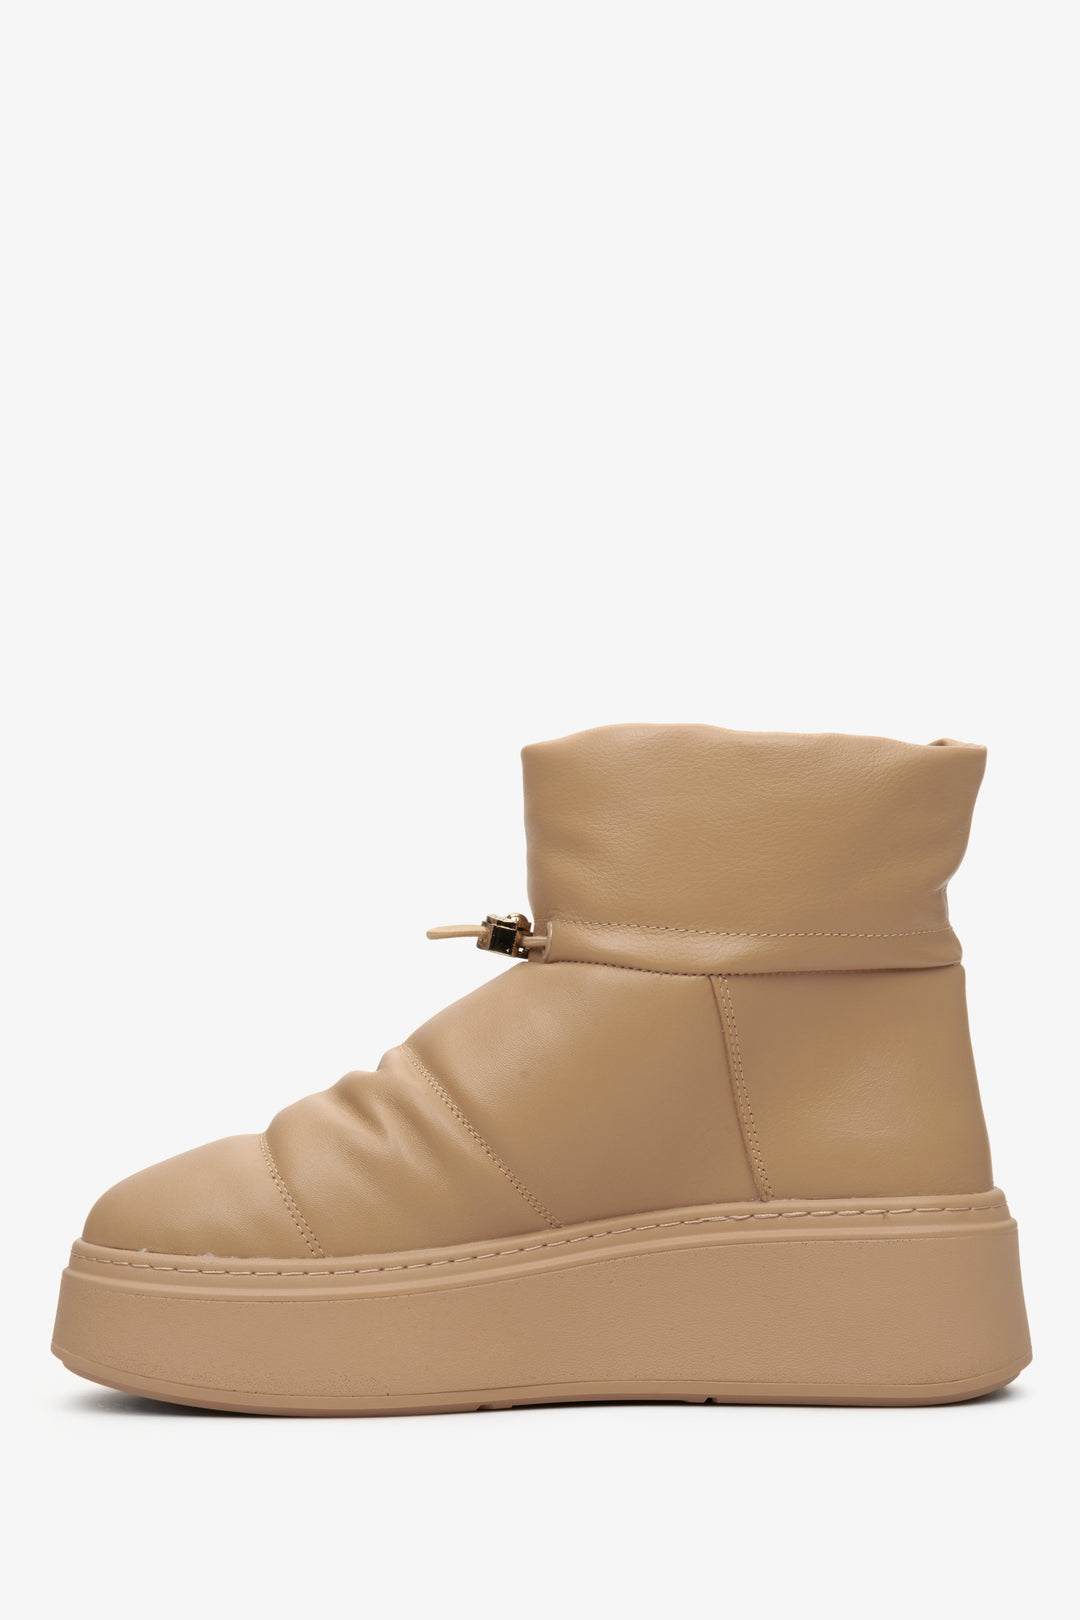 Winter women's snow boots by Estro with a cuff in brown color.